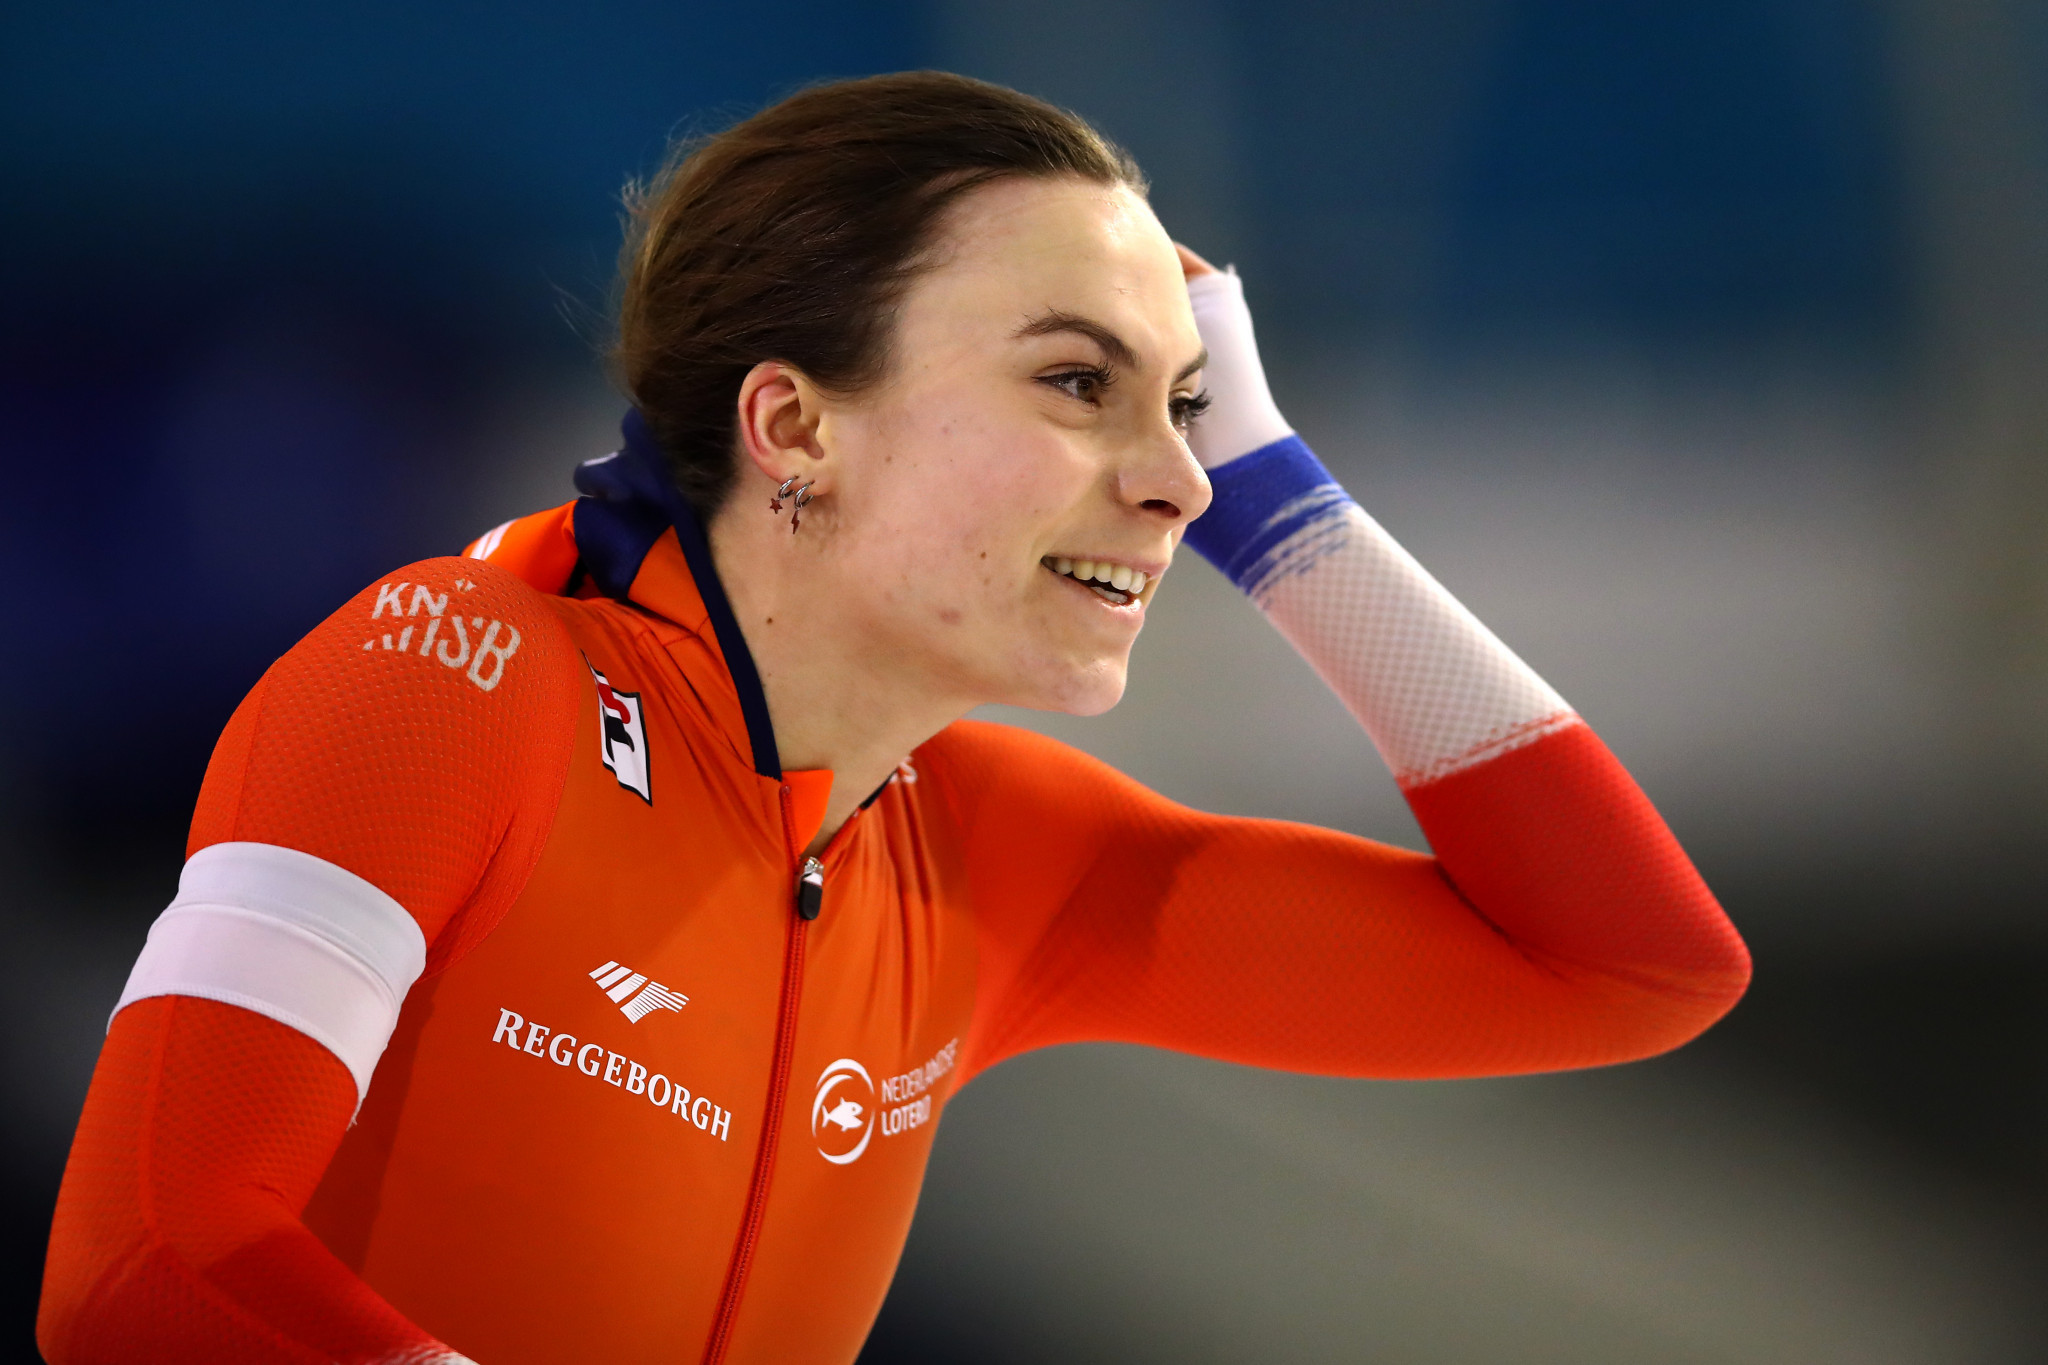 Dutch sweep gold medals on day two of European Speed Skating Championships